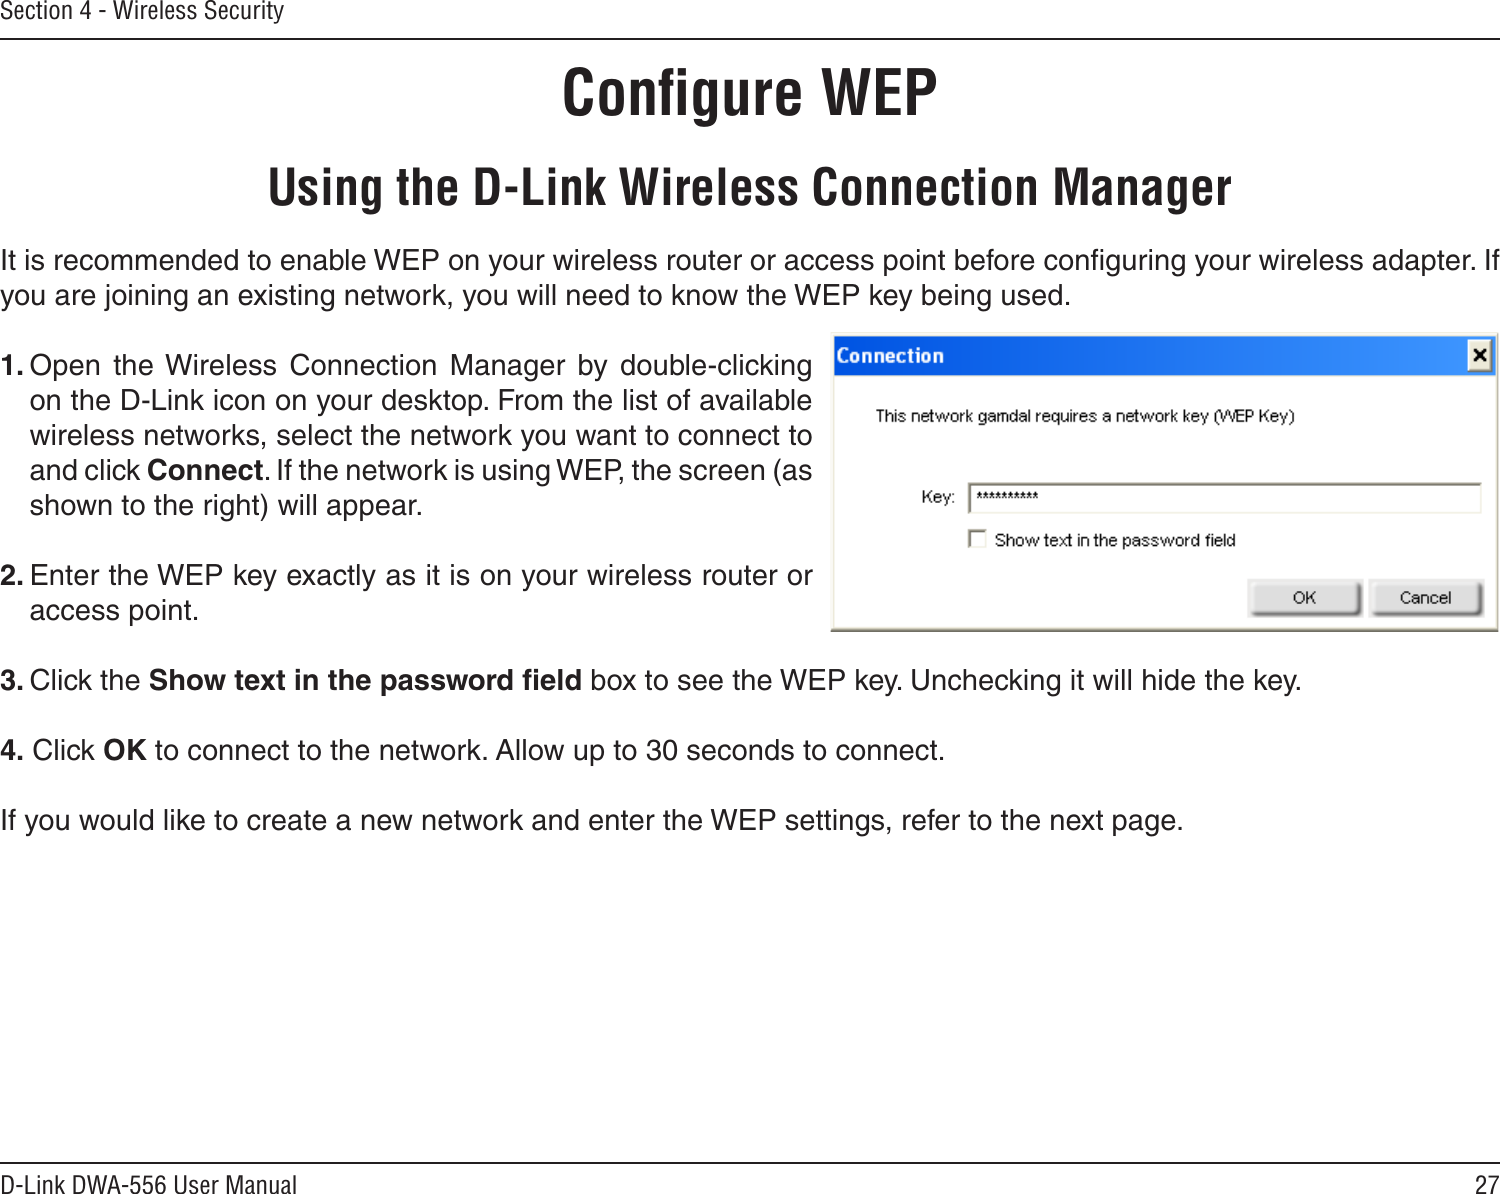 27D-Link DWA-556 User ManualSection 4 - Wireless SecurityConﬁgure WEPUsing the D-Link Wireless Connection ManagerIt is recommended to enable WEP on your wireless router or access point before conﬁguring your wireless adapter. If you are joining an existing network, you will need to know the WEP key being used.1. Open  the Wireless  Connection  Manager  by  double-clicking on the D-Link icon on your desktop. From the list of available wireless networks, select the network you want to connect to and click Connect. If the network is using WEP, the screen (as shown to the right) will appear. 2. Enter the WEP key exactly as it is on your wireless router or access point.3. Click the Show text in the password ﬁeld box to see the WEP key. Unchecking it will hide the key.4. Click OK to connect to the network. Allow up to 30 seconds to connect.If you would like to create a new network and enter the WEP settings, refer to the next page.